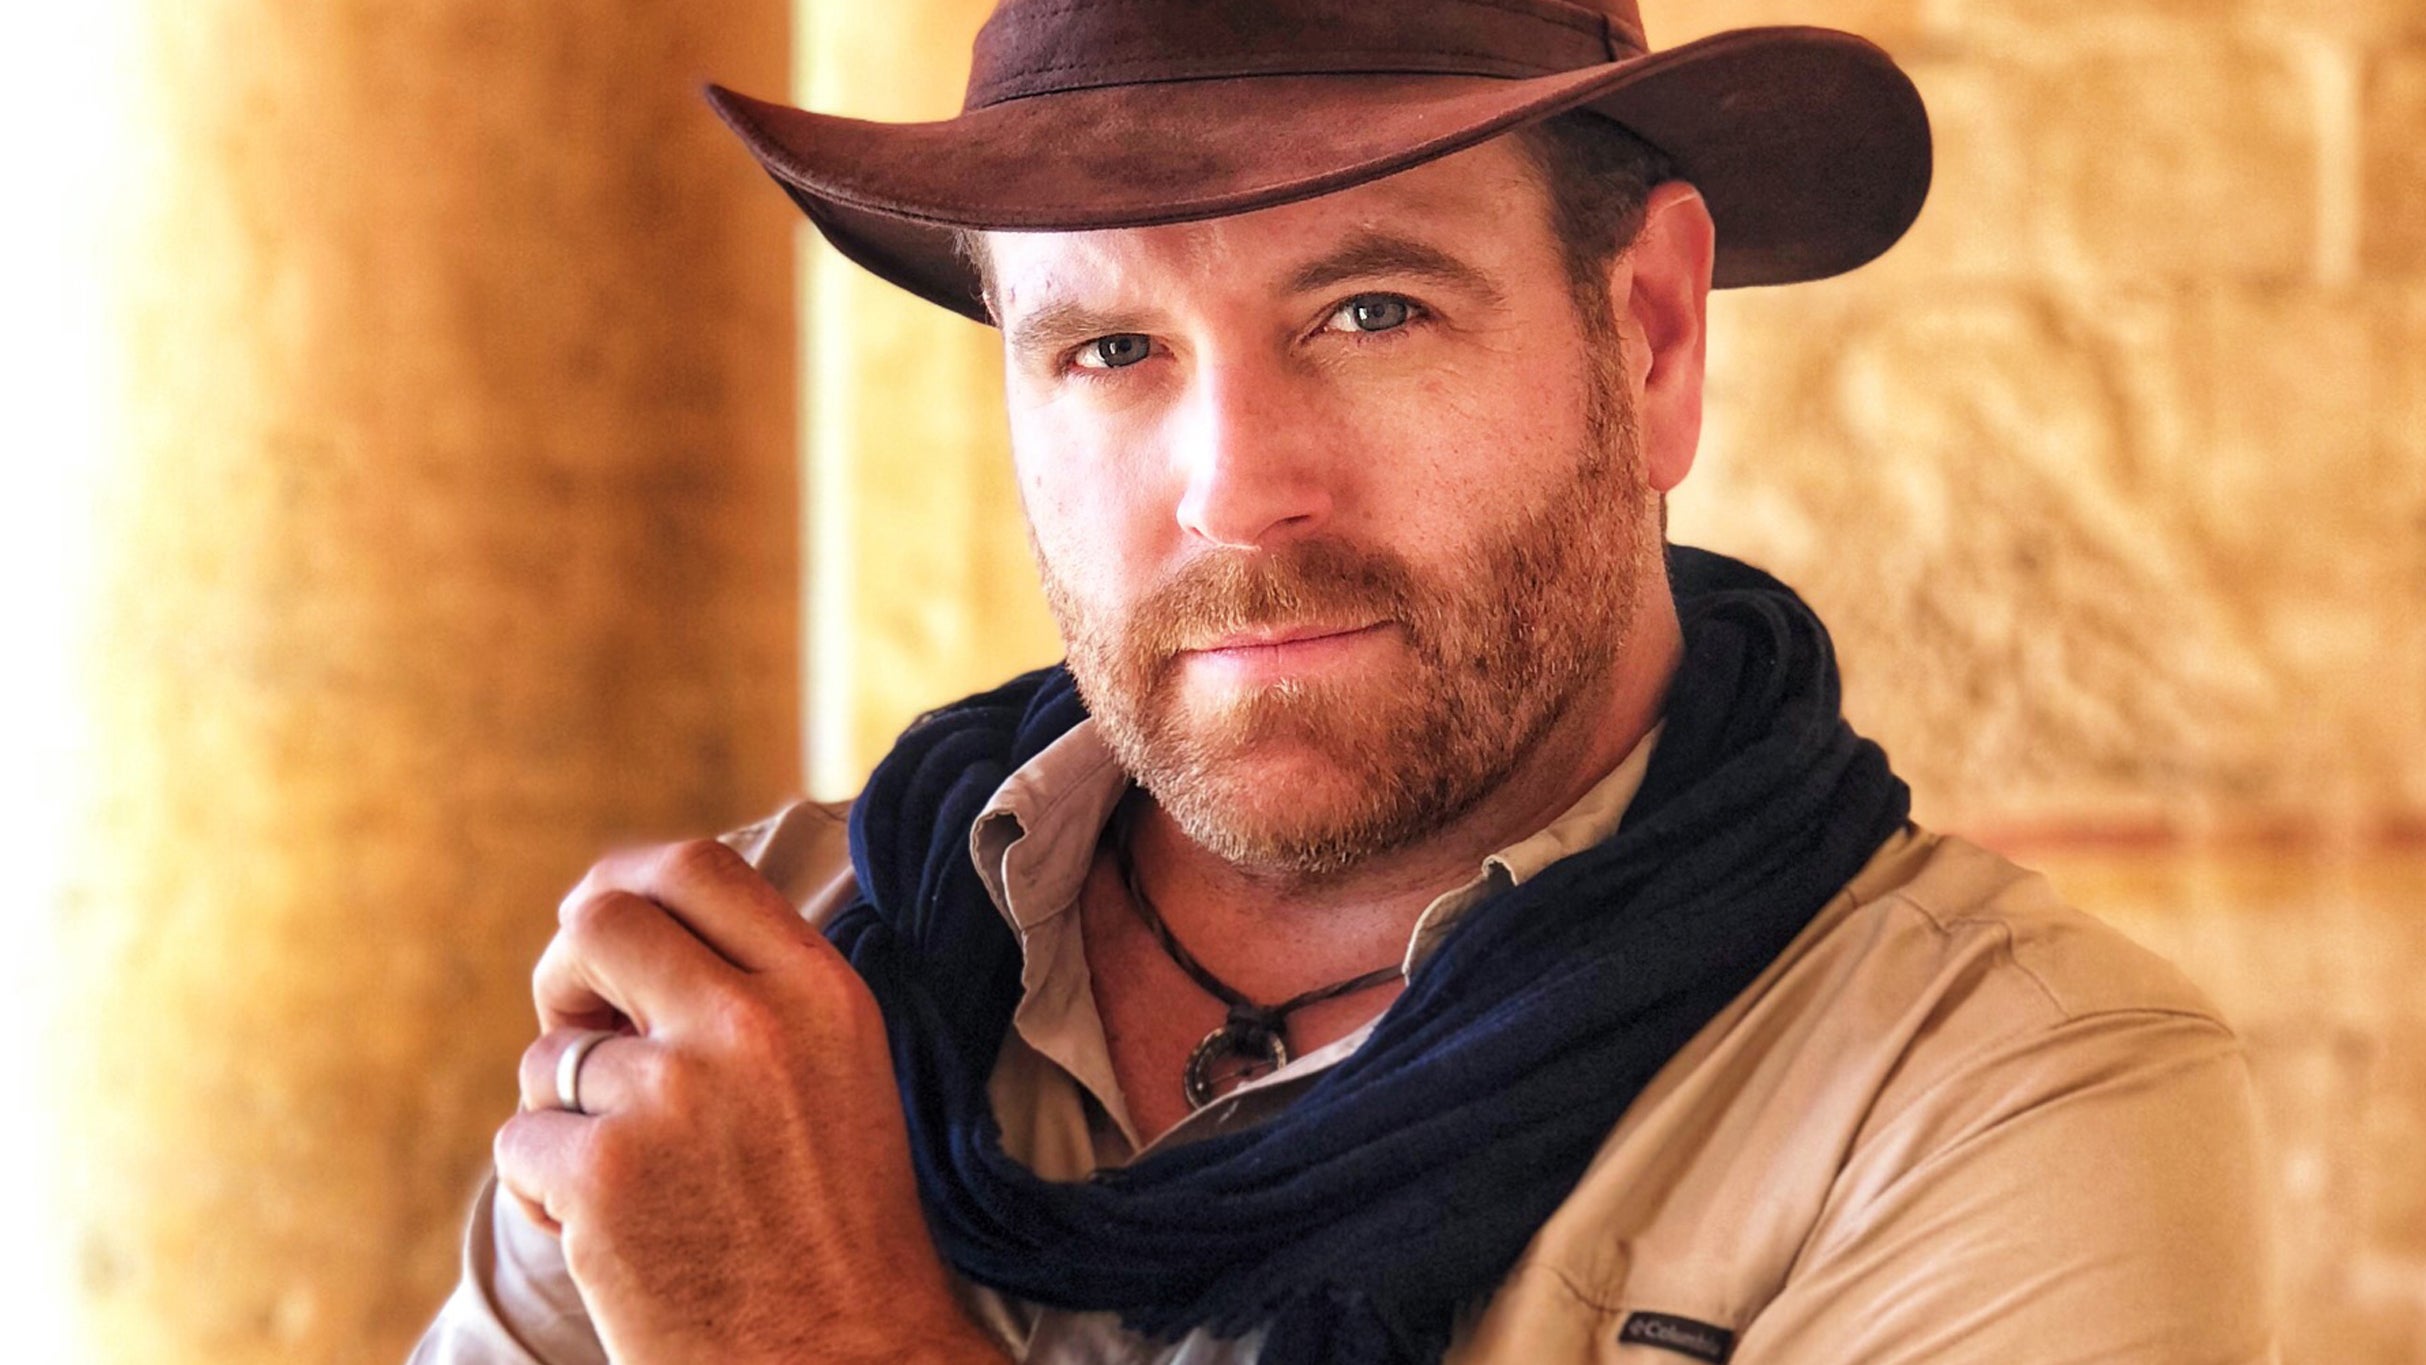 Josh Gates LIVE! An Evening of Legends, Mysteries & Tales of Adventure free presale listing for show tickets in Louisville, KY (The Louisville Palace)